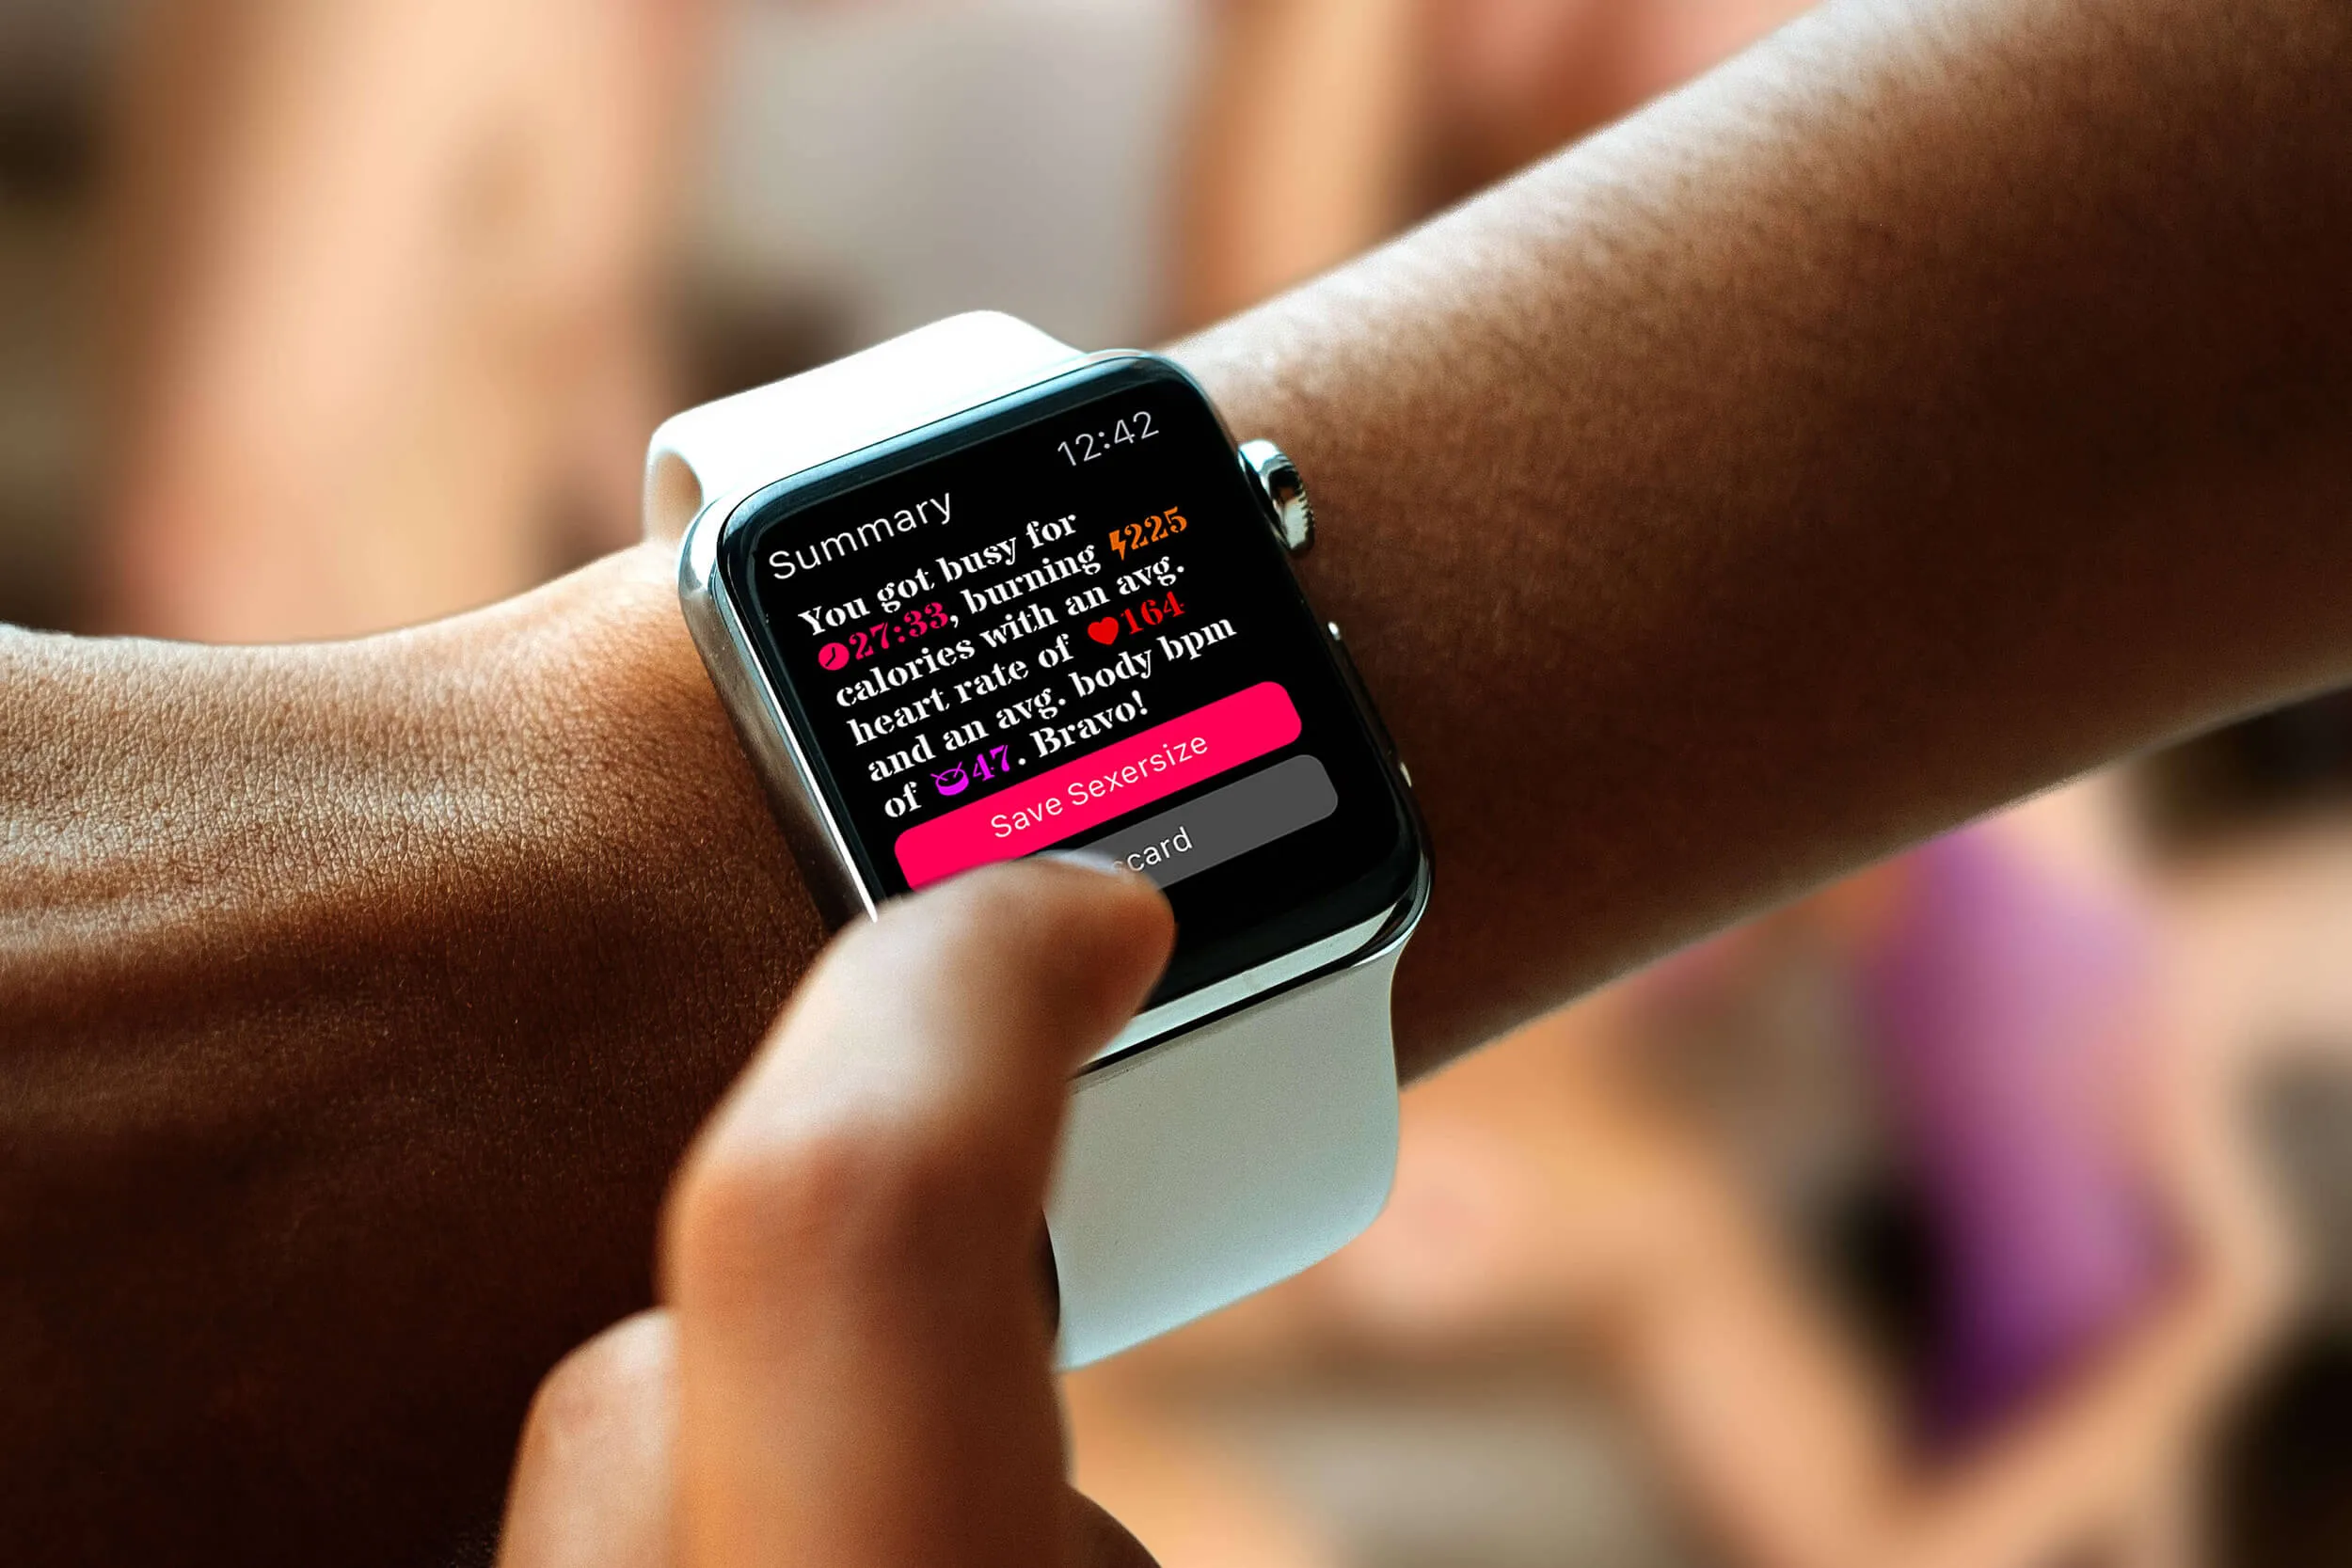 A person using an Apple Watch app that shows the workout statistics from their sex life